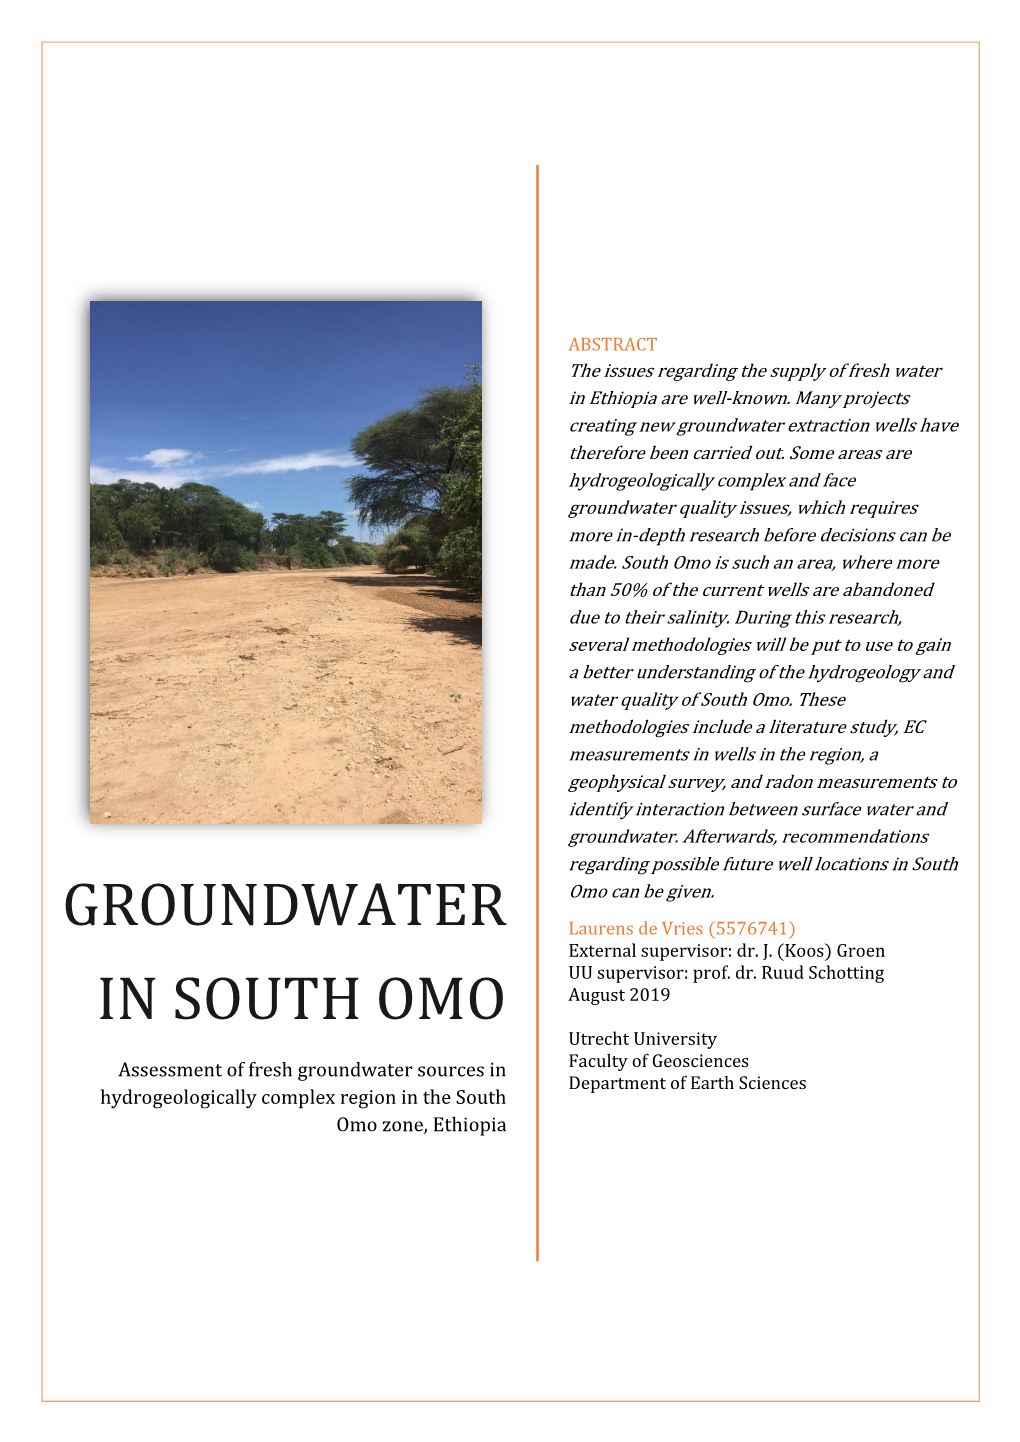 Groundwater in South